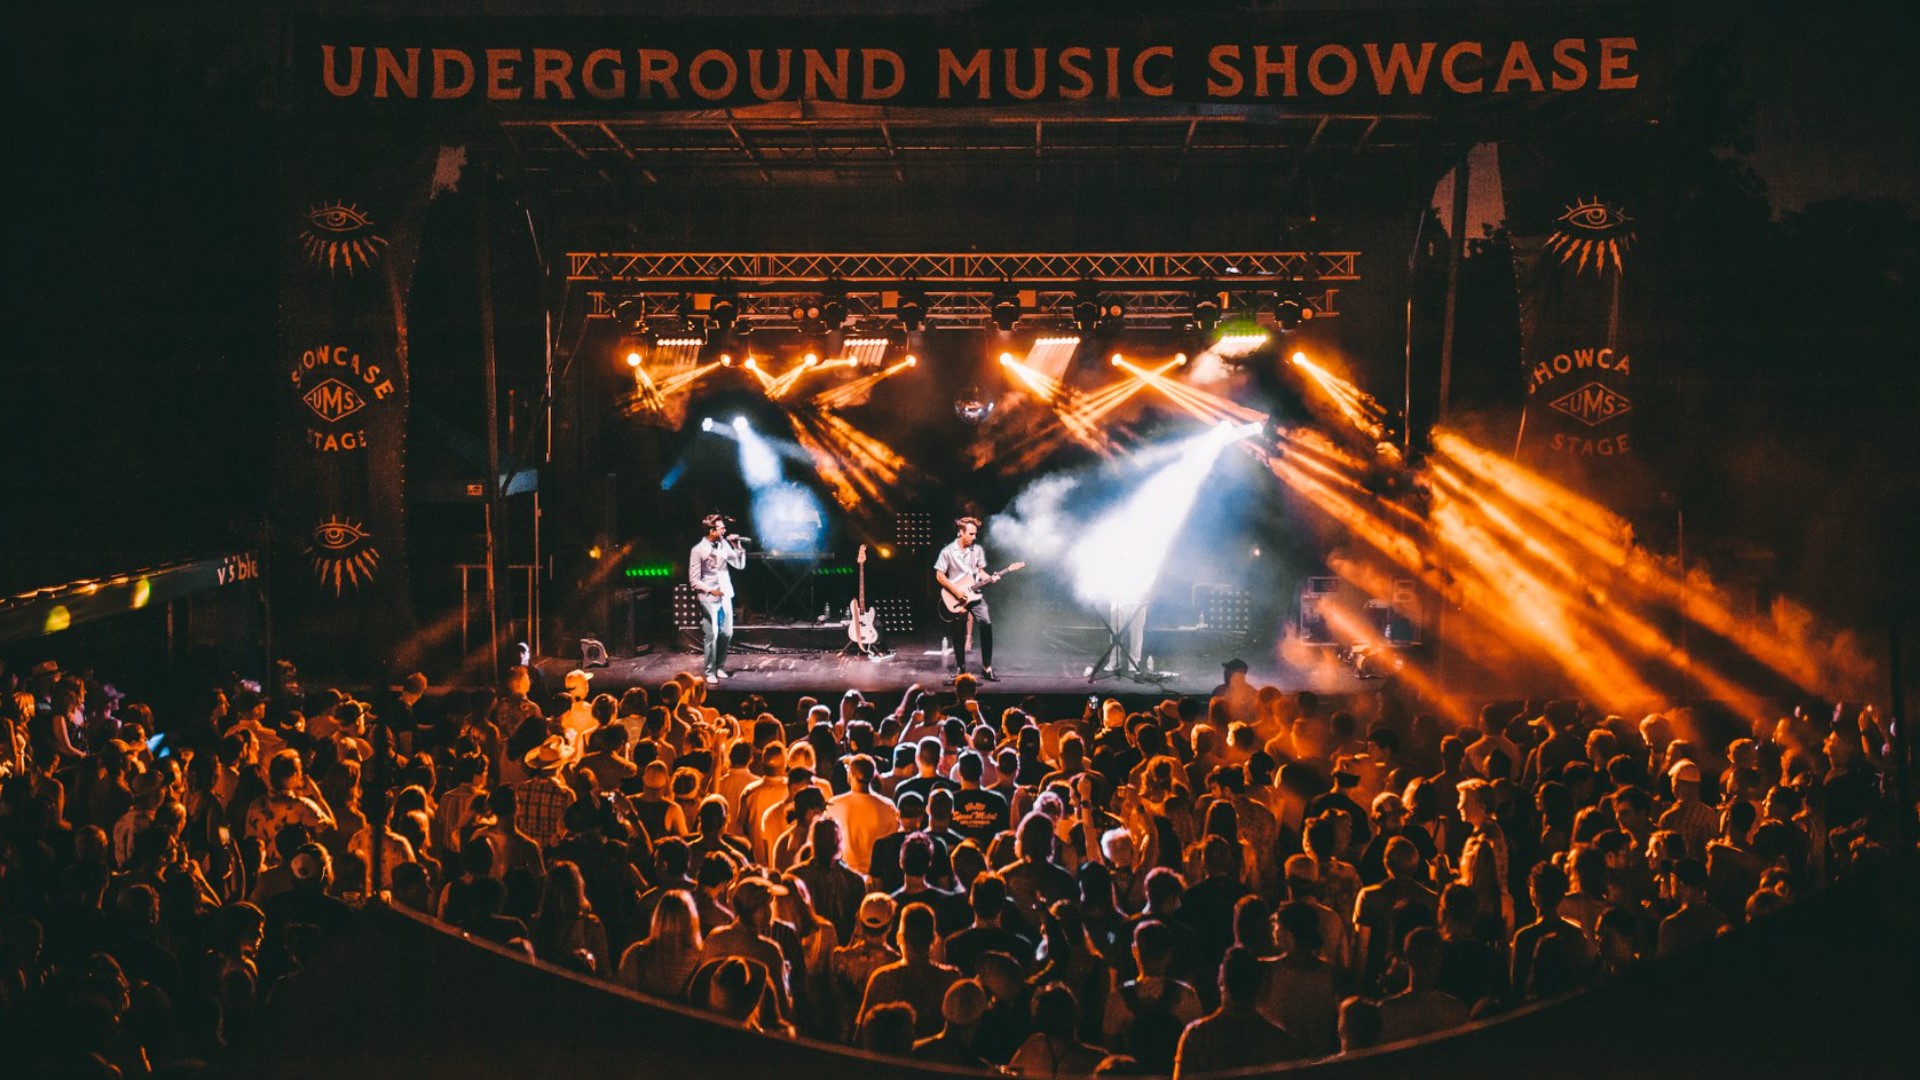 Underground Music Showcase will feature more than 300 bands in 2019 in the neighborhood along South Broadway in Denver.